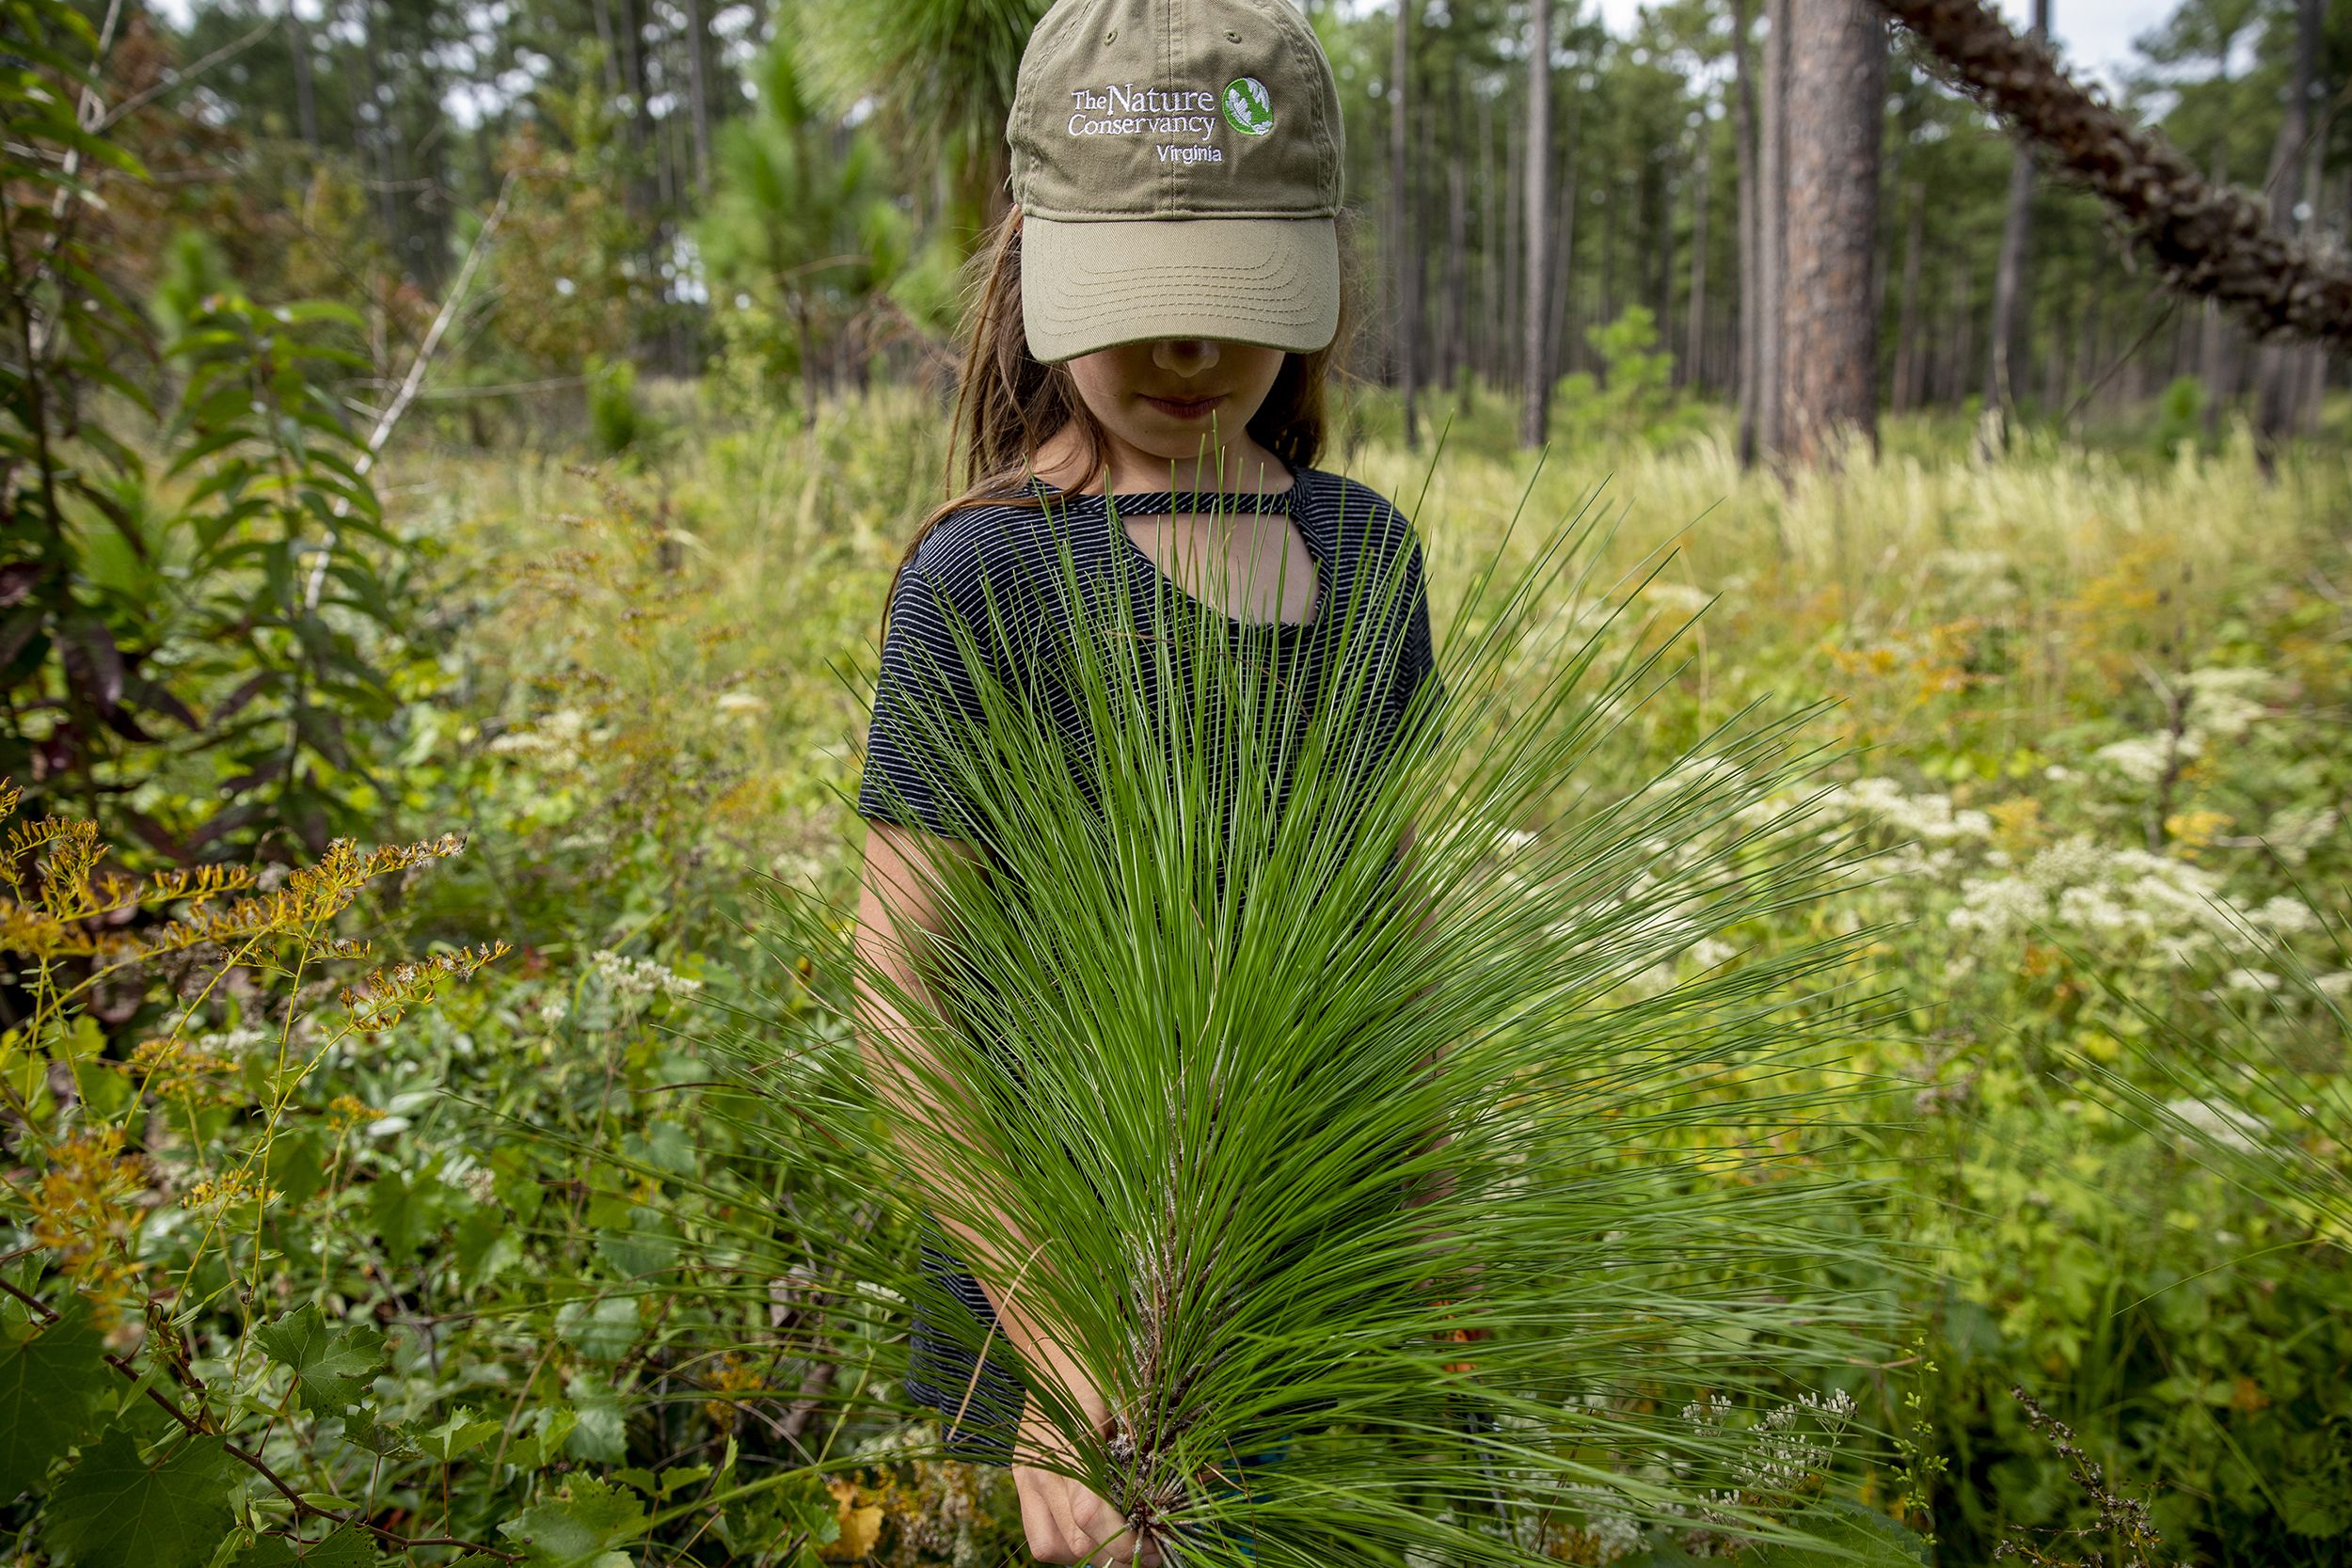 A young girl stands behind a longleaf pine seedling. The top of the seedling spreads out with long needles. She is looking down, her face partly obscured by the brim of the TNC ballcap she is wearing.